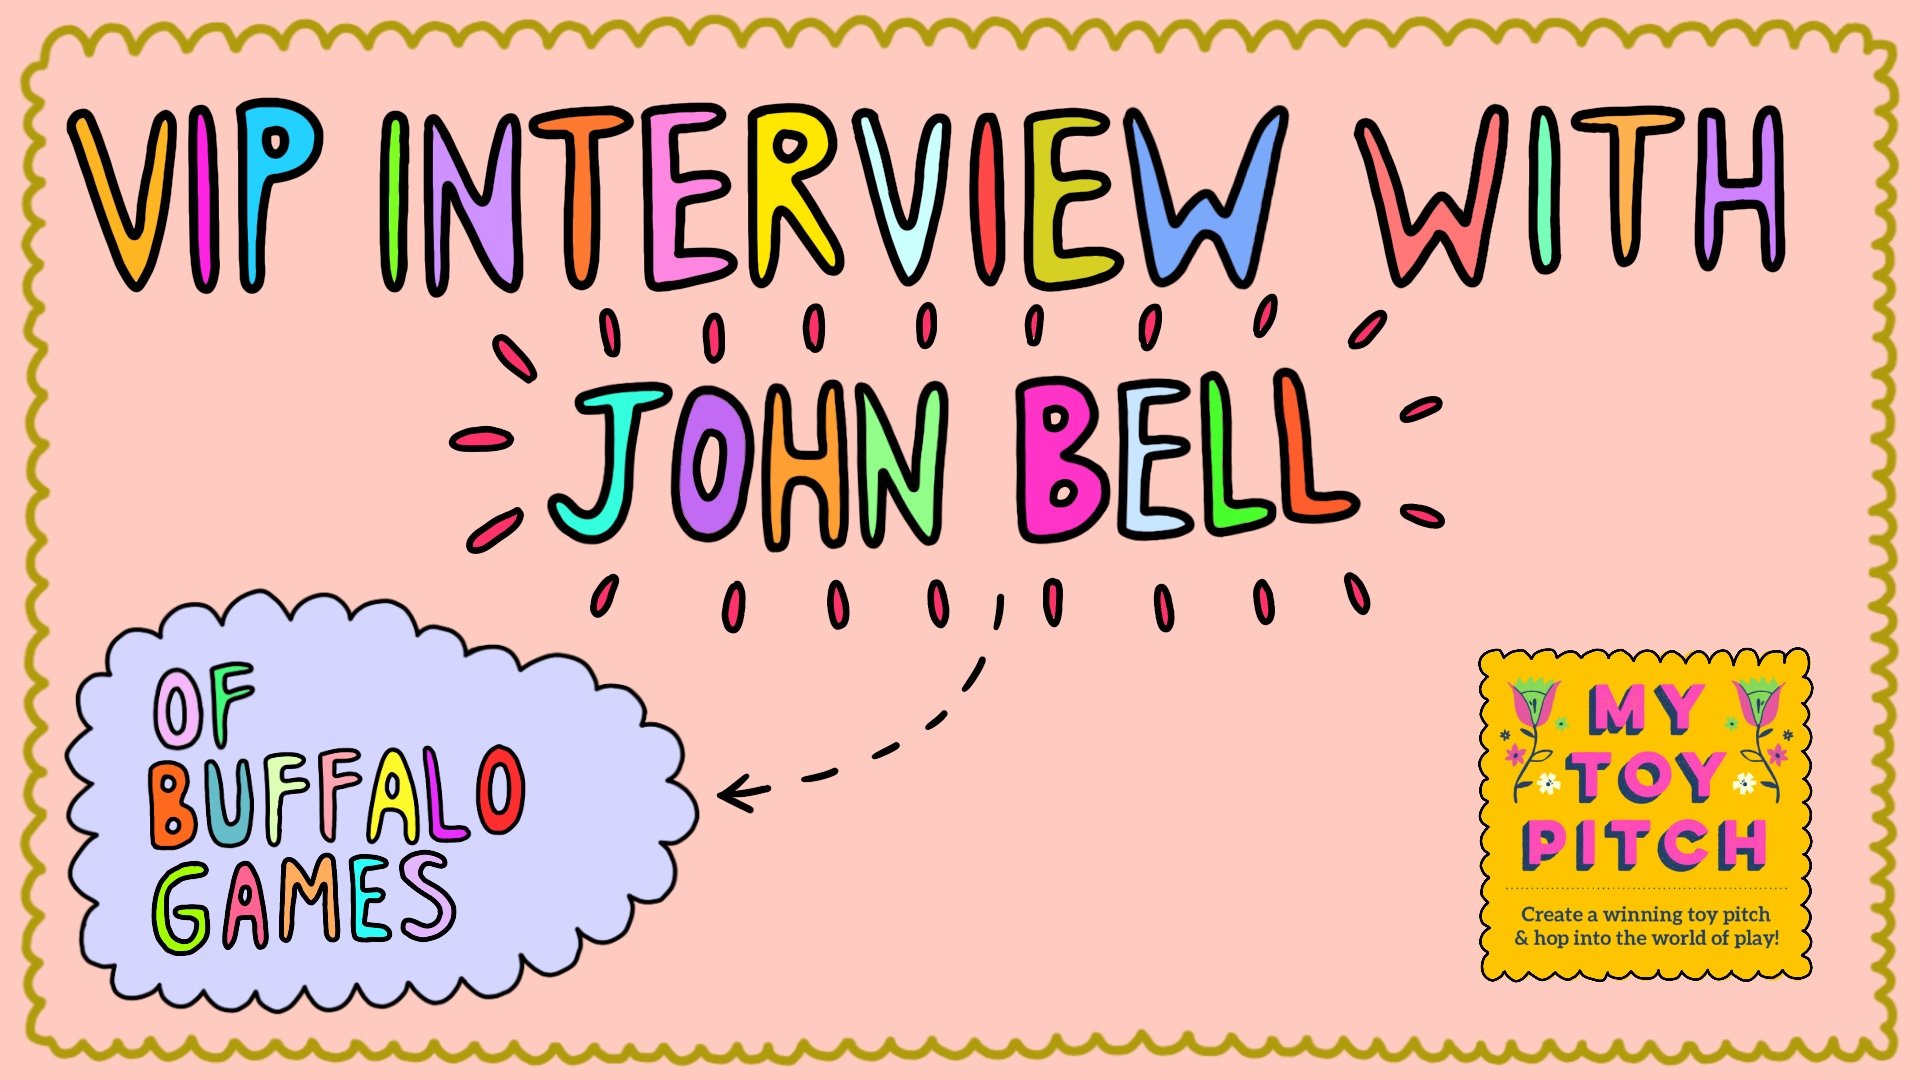  Cover image for a video of an interview with John Bell of Buffalo Games, from Make Art That Sells: My Toy Pitch e-course. 